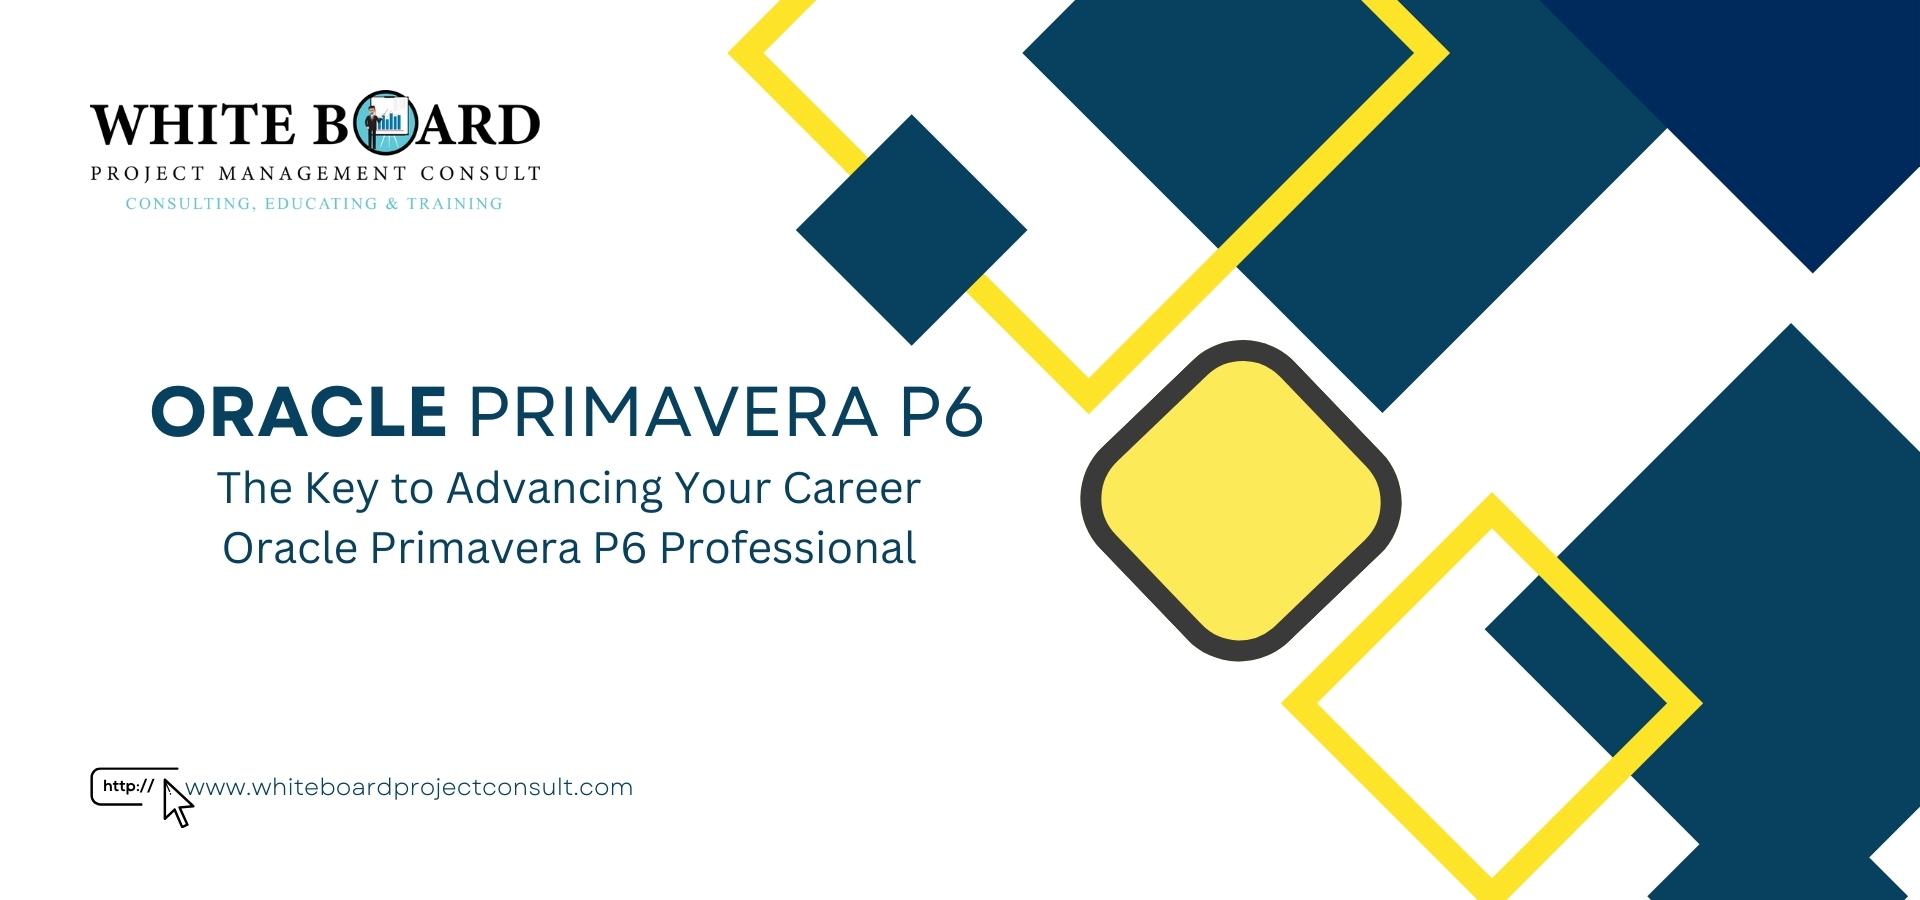 The Key to Advancing Your Career – Oracle Primavera P6 Professional